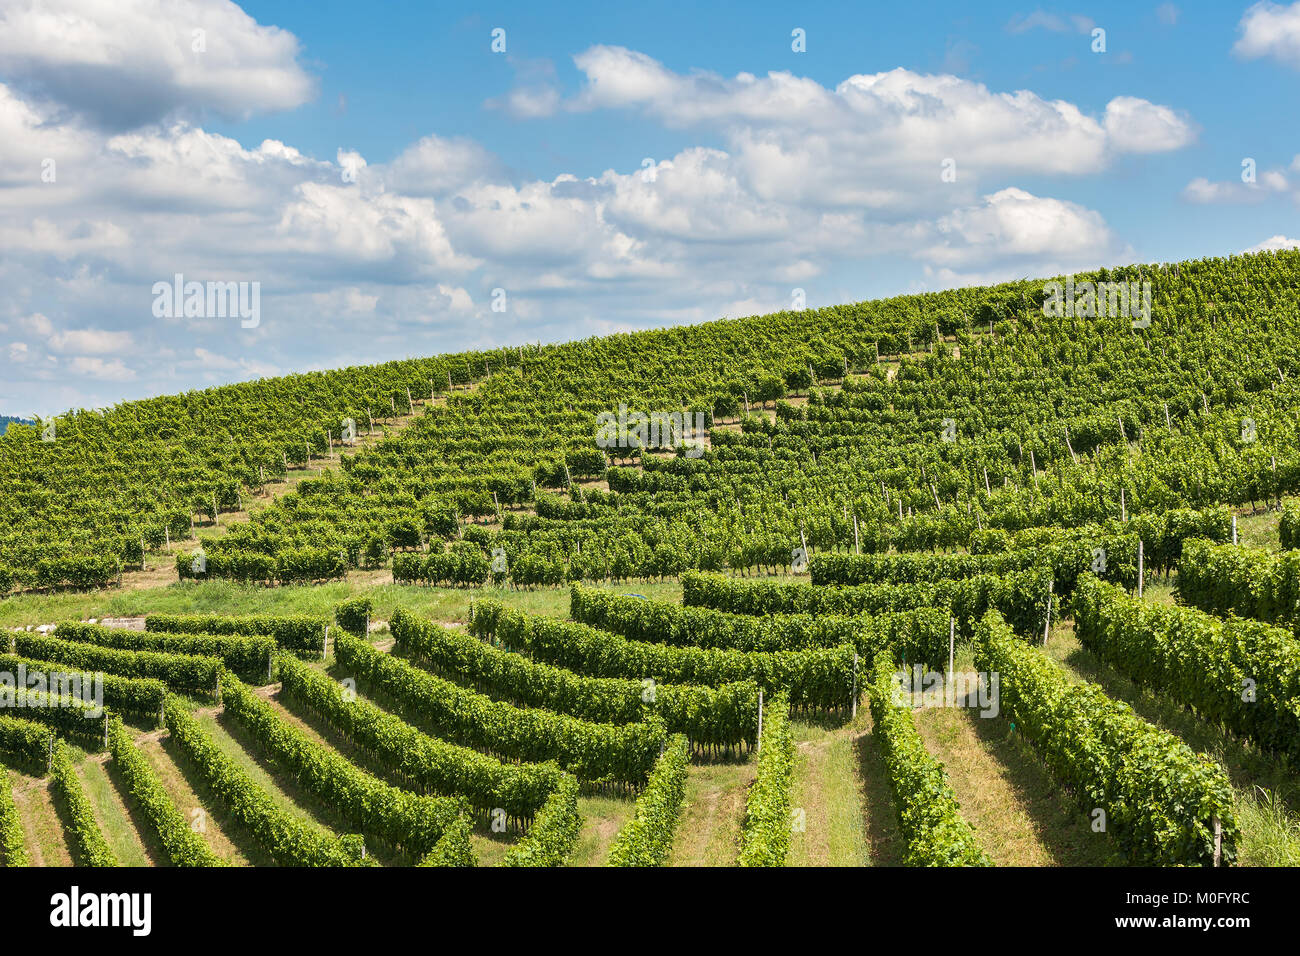 Green vineyards on the hills of Piedmont, Northern Italy. Stock Photo